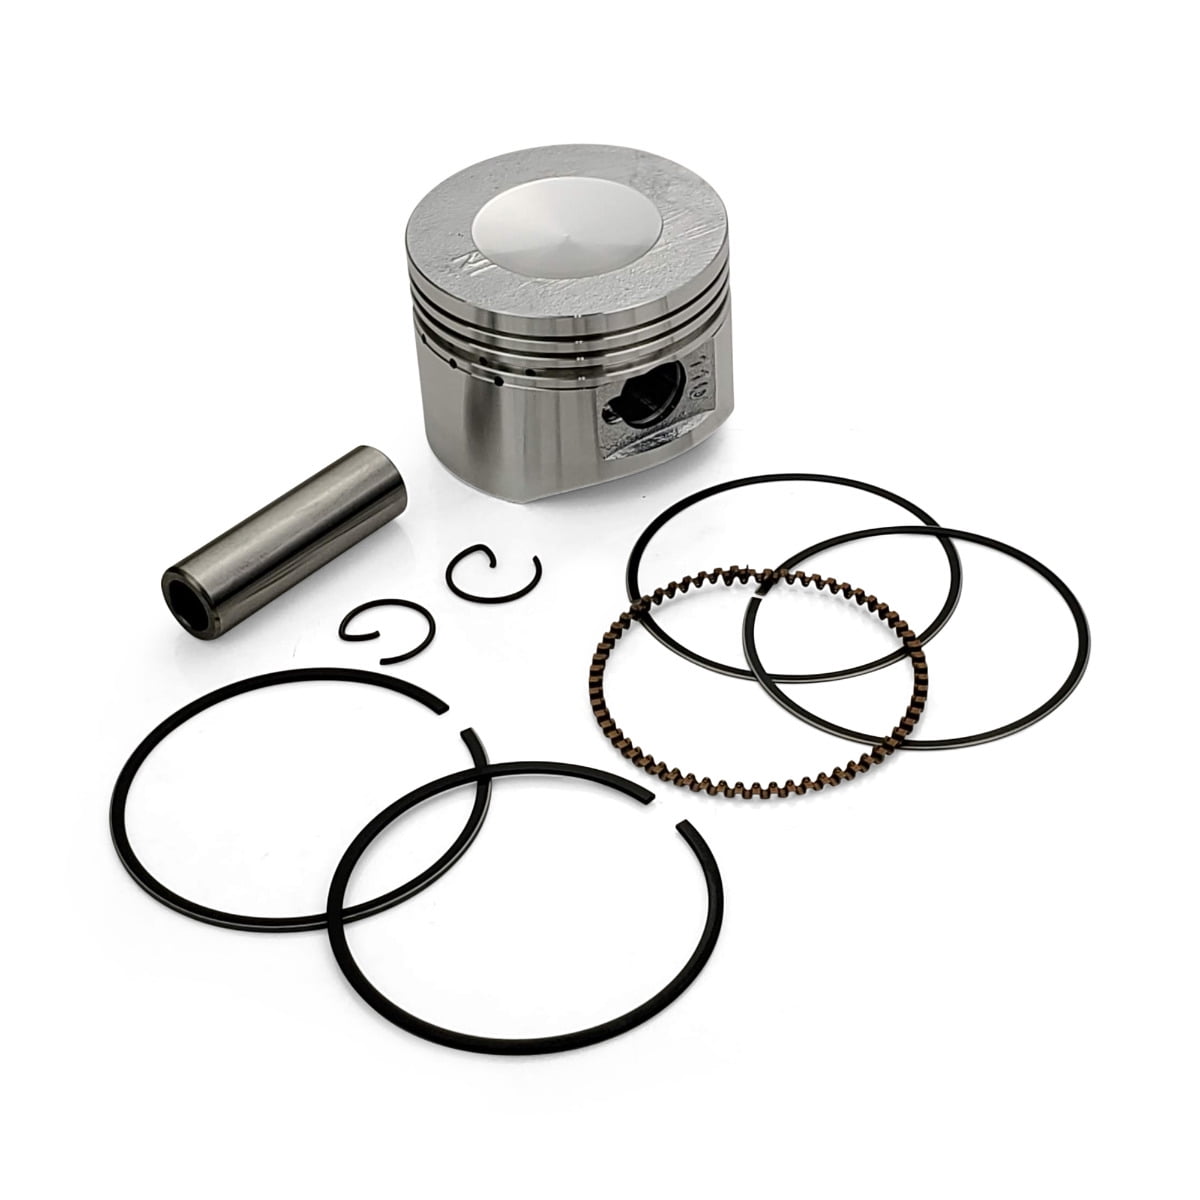 How to Replace Engine Piston Rings